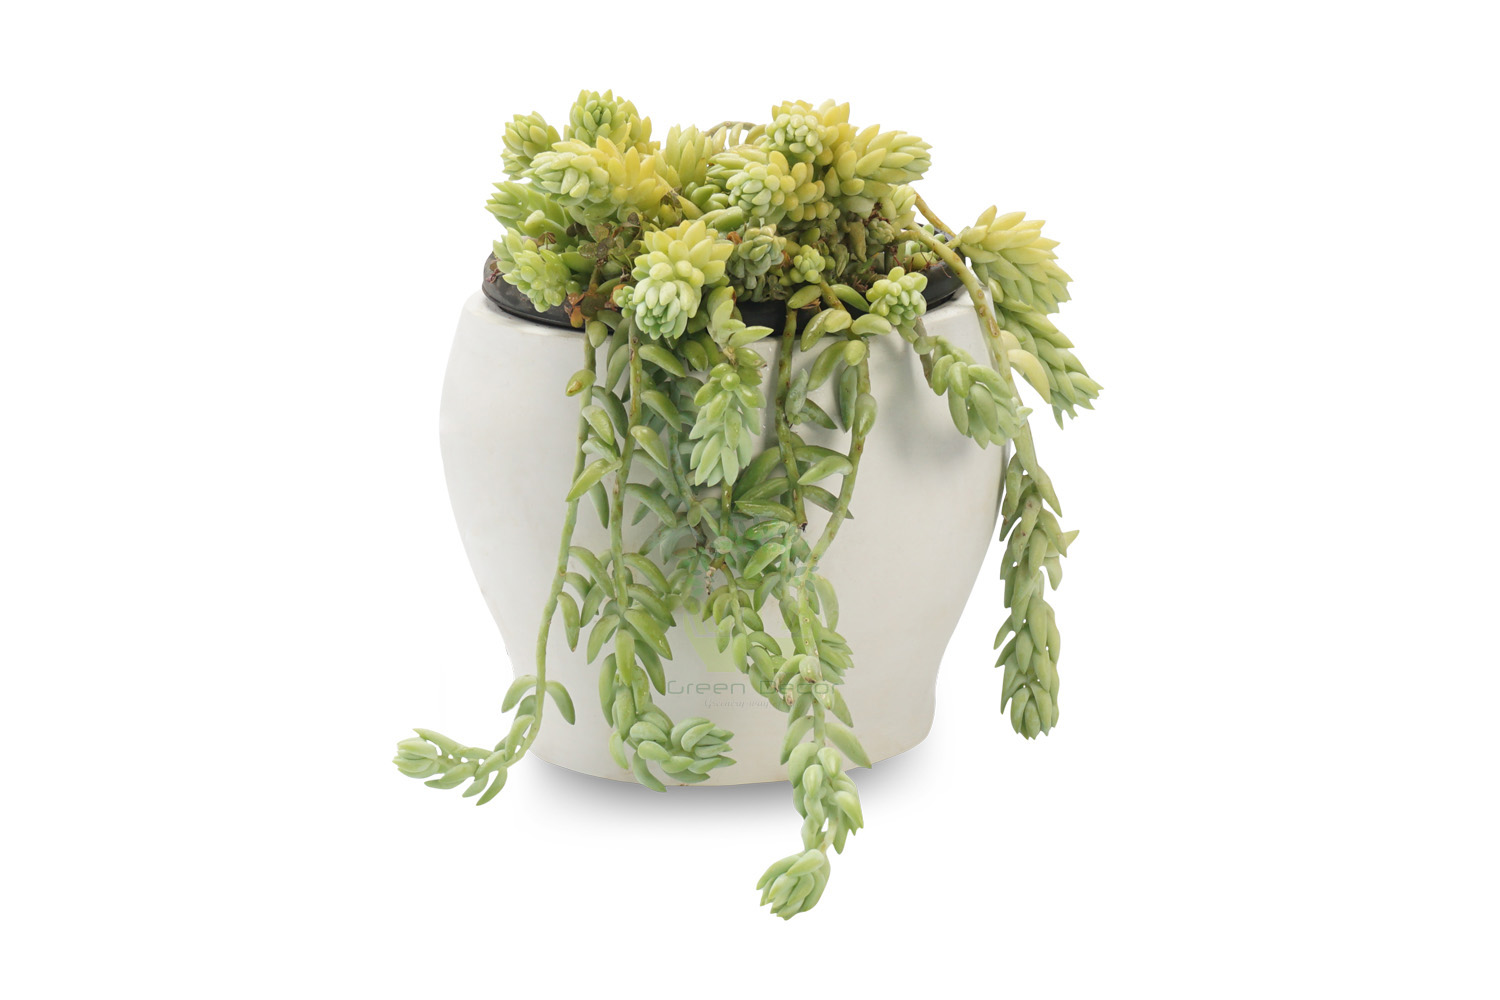 Buy Burrito Plants , White Pots and seeds in Delhi NCR by the best online nursery shop Greendecor.